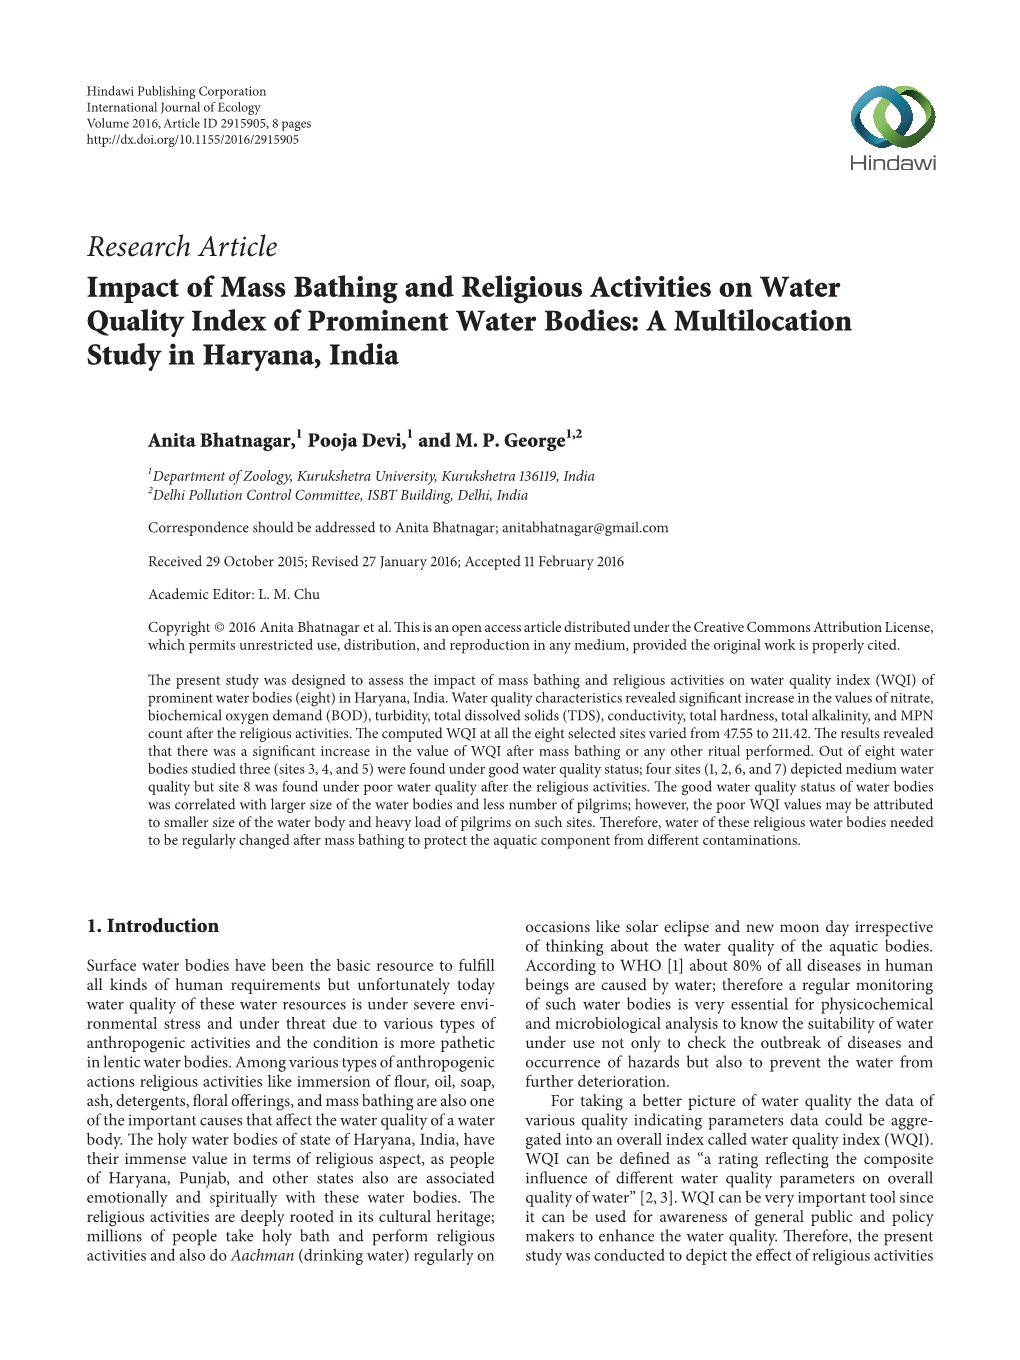 Research Article Impact of Mass Bathing and Religious Activities on Water Quality Index of Prominent Water Bodies: a Multilocation Study in Haryana, India